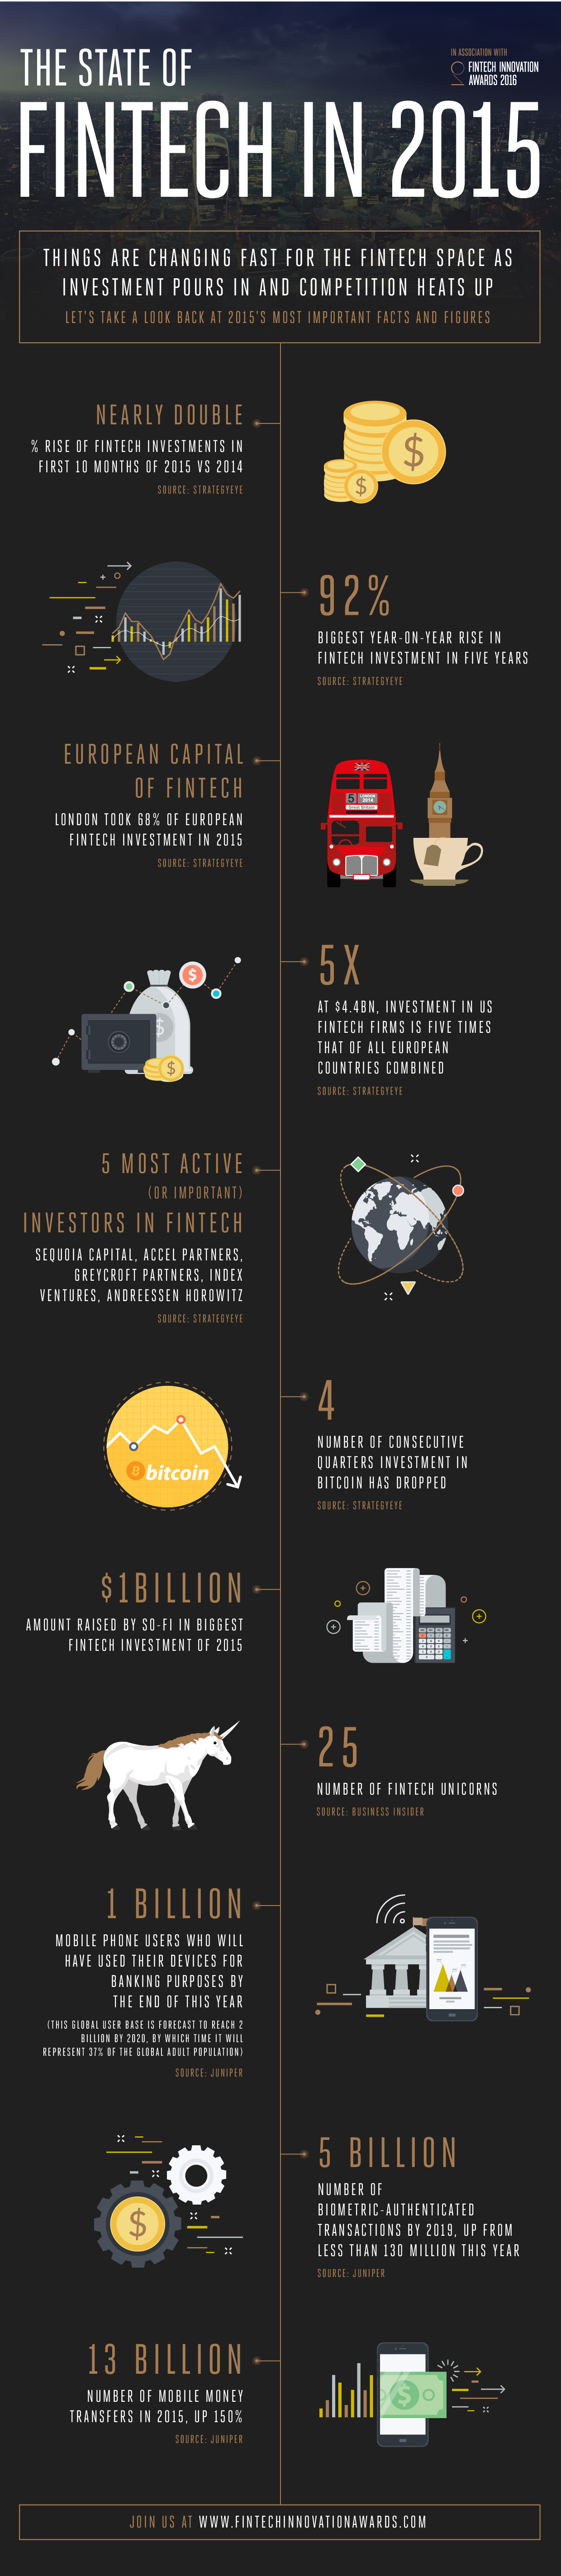 The State of FinTech in 2015 (Infographic)